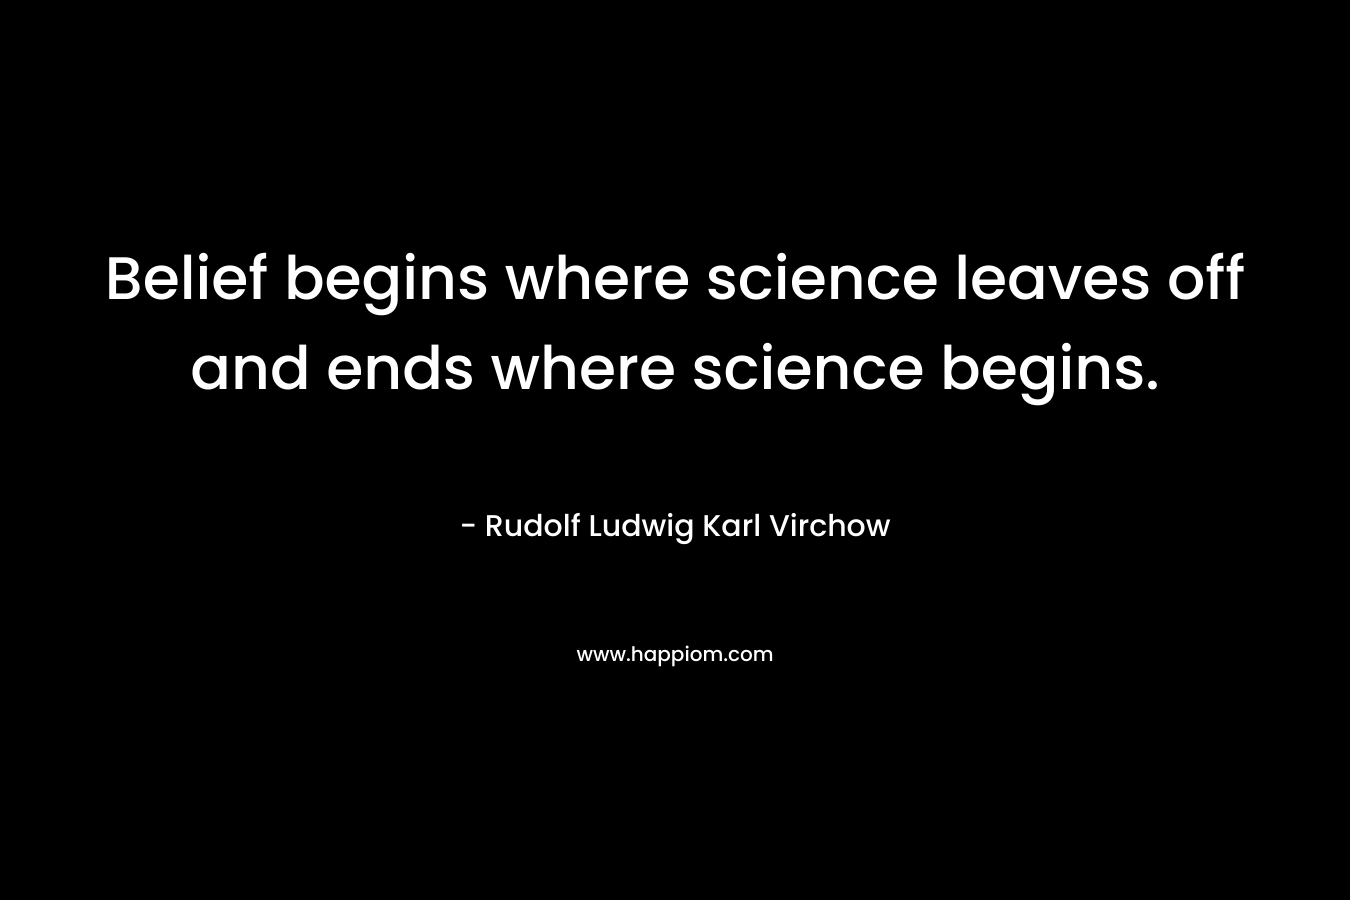 Belief begins where science leaves off and ends where science begins.